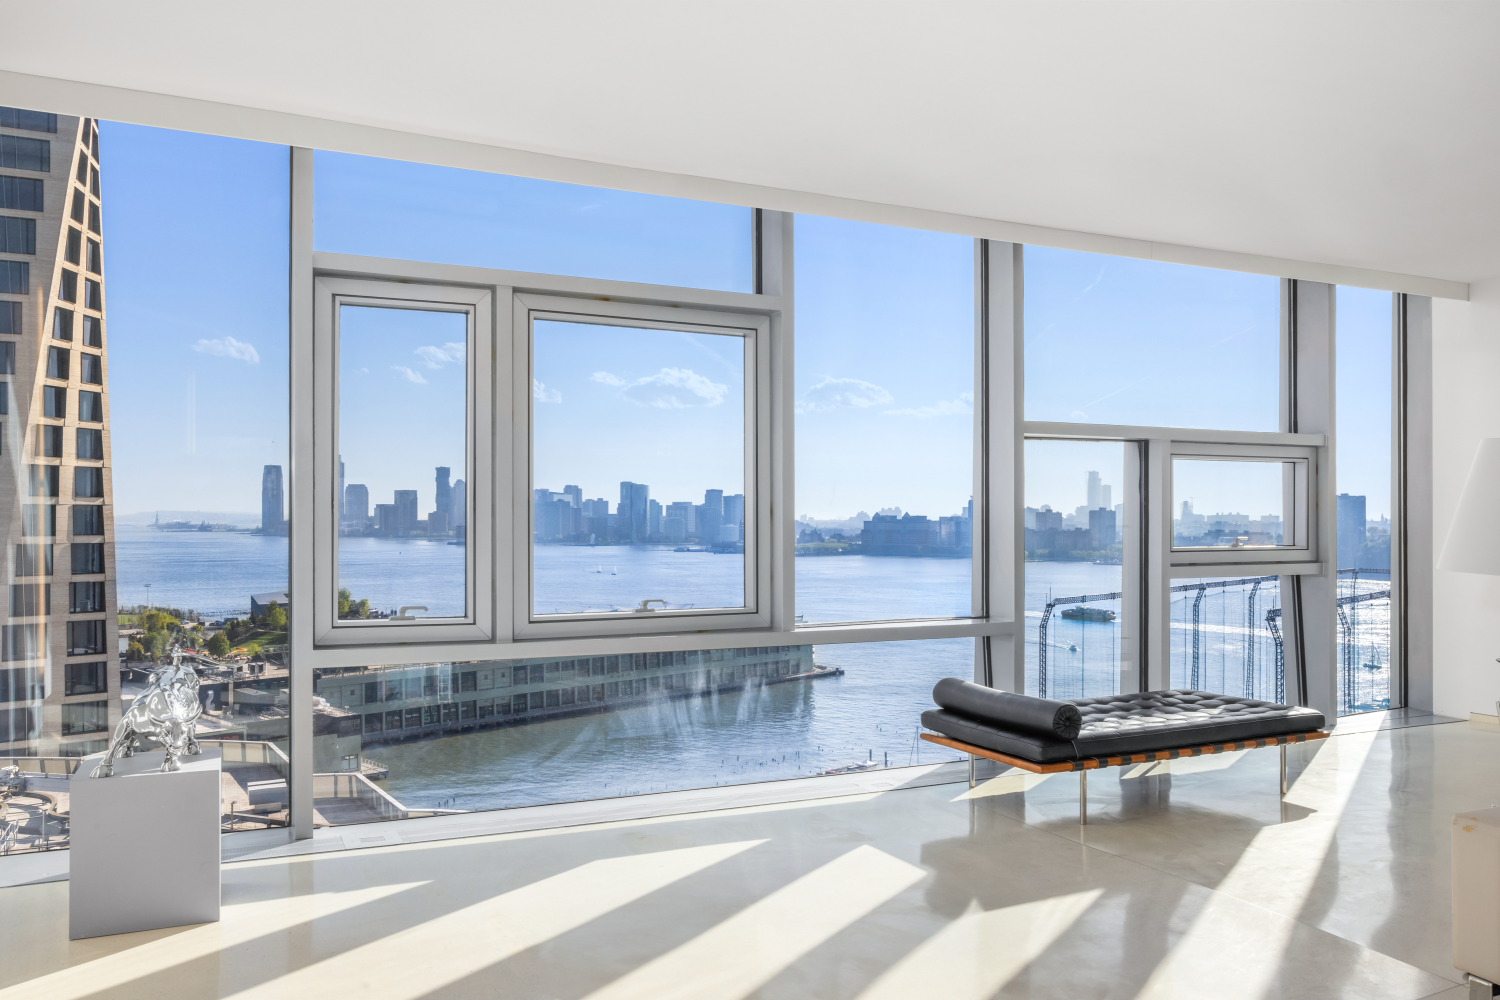 100 11th Avenue 20B, Chelsea, Downtown, NYC - 3 Bedrooms  
3.5 Bathrooms  
6 Rooms - 